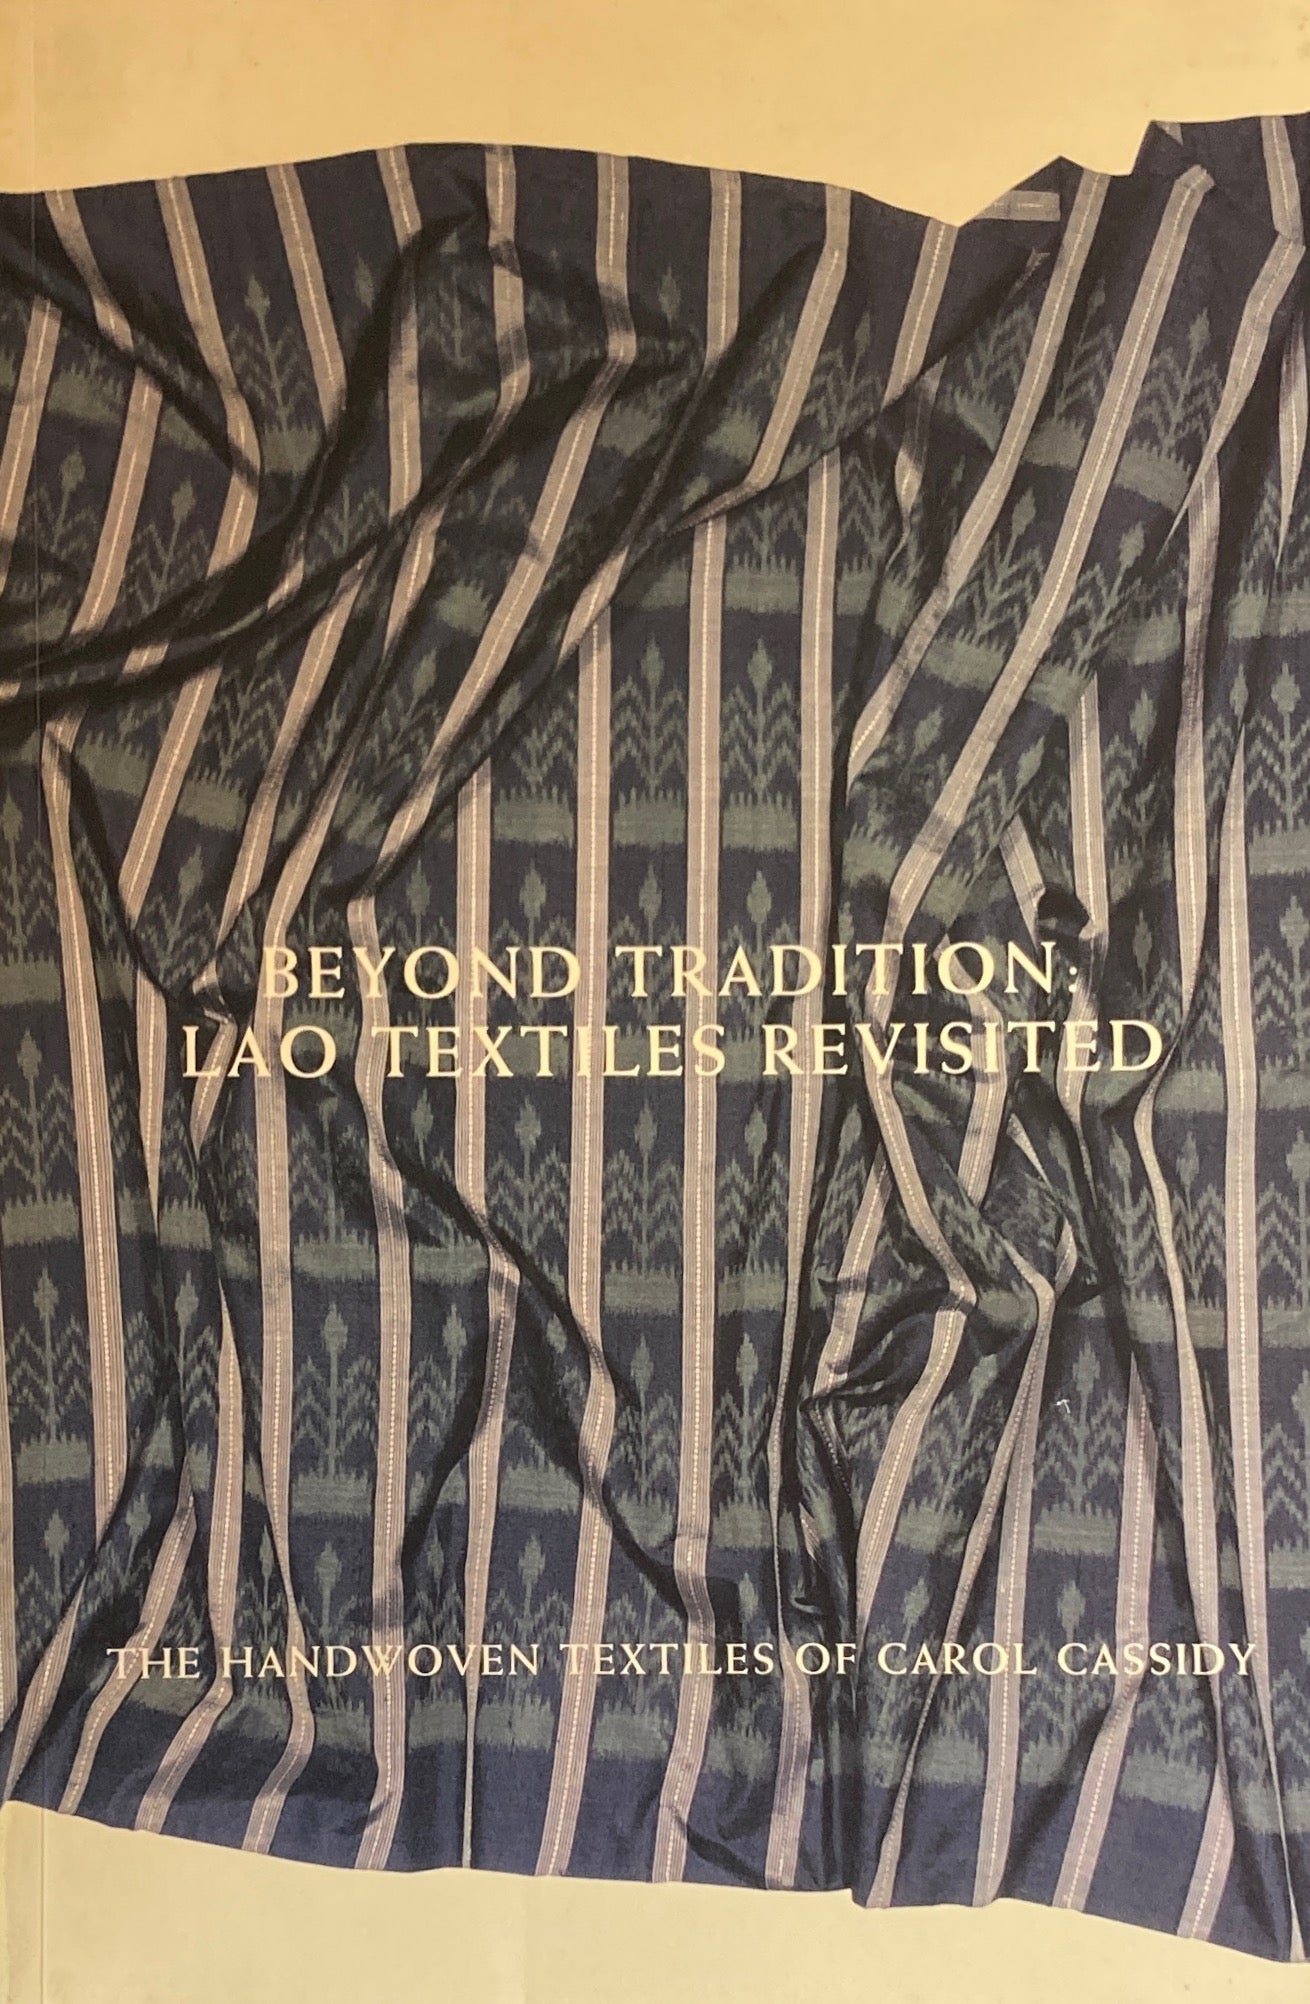 Beyond Tradition Lao Textiles Revisited The Hand Woven Textiles of Carol Cassidy